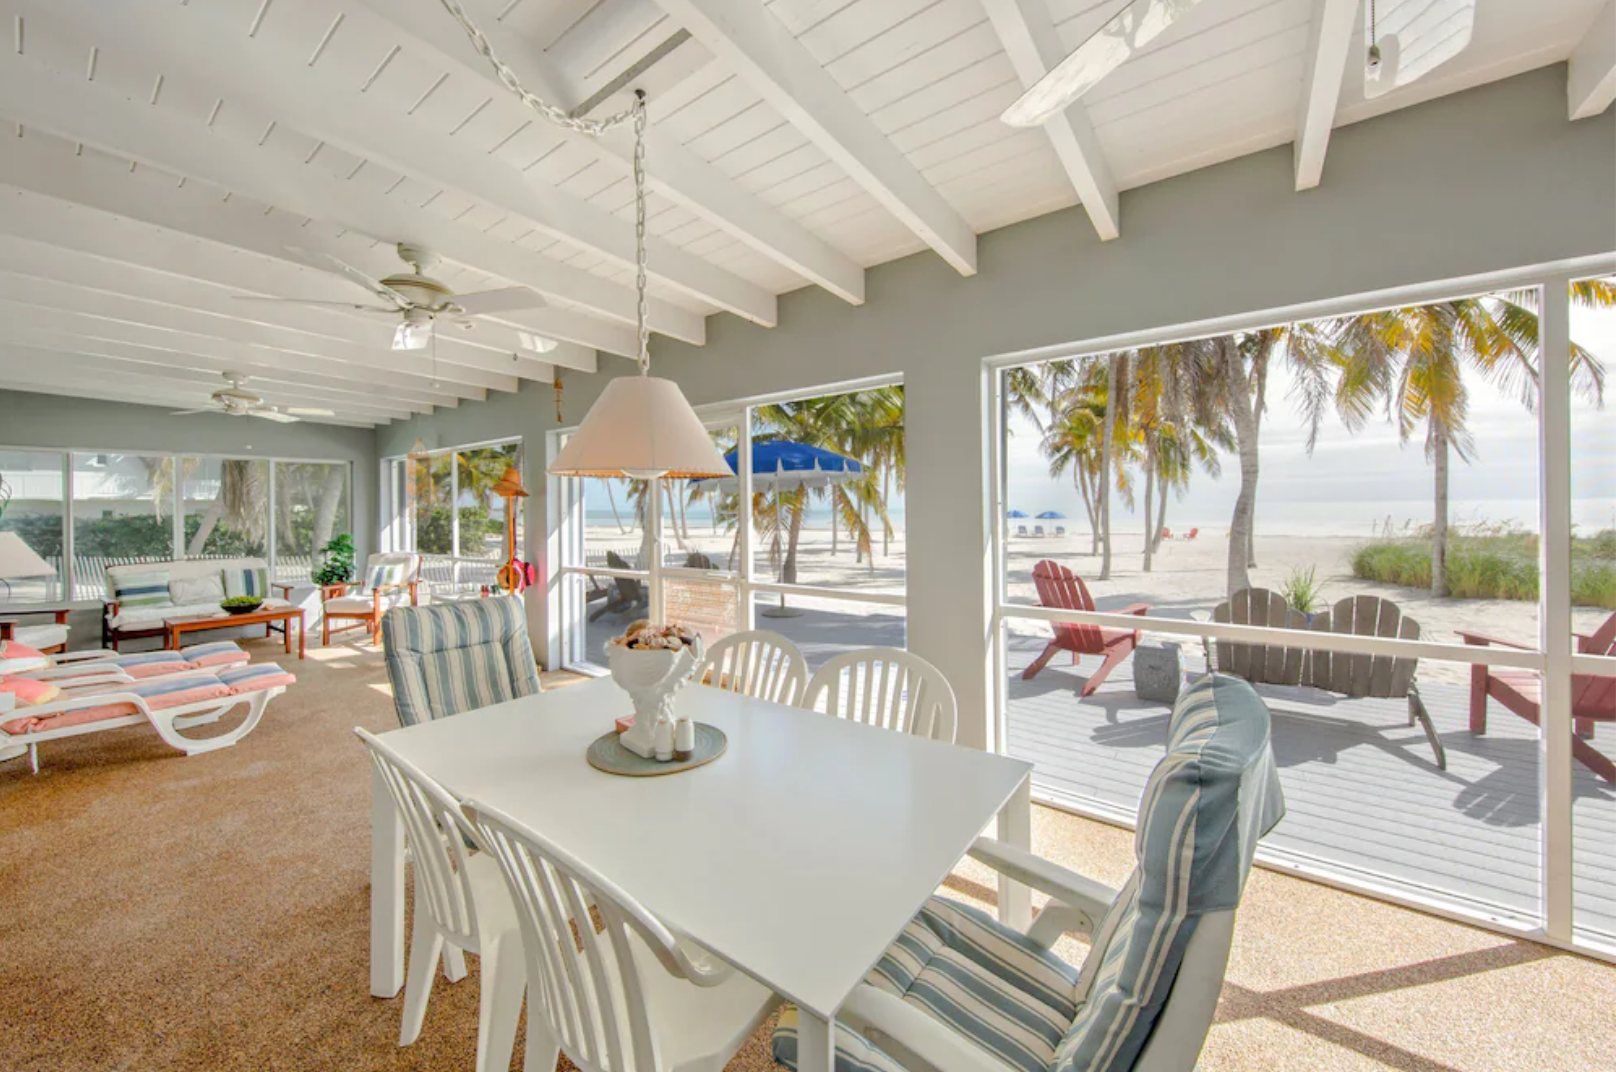 The Best Airbnbs in the Florida Keys